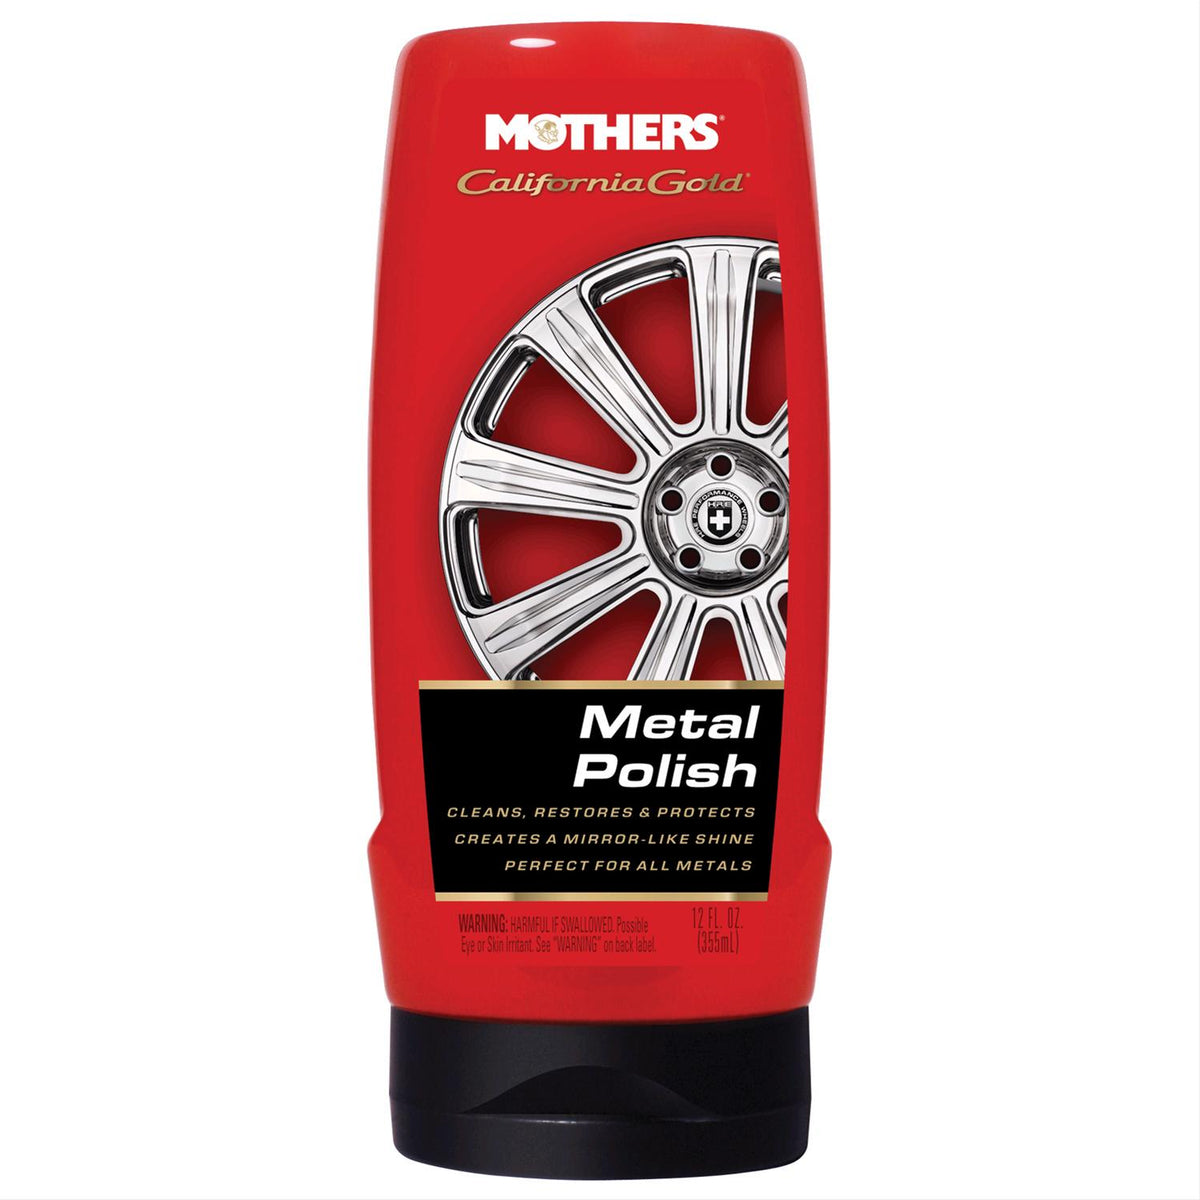 MOTHERS 05100 Mag & Aluminum Polish - Shines & Protects - Brass